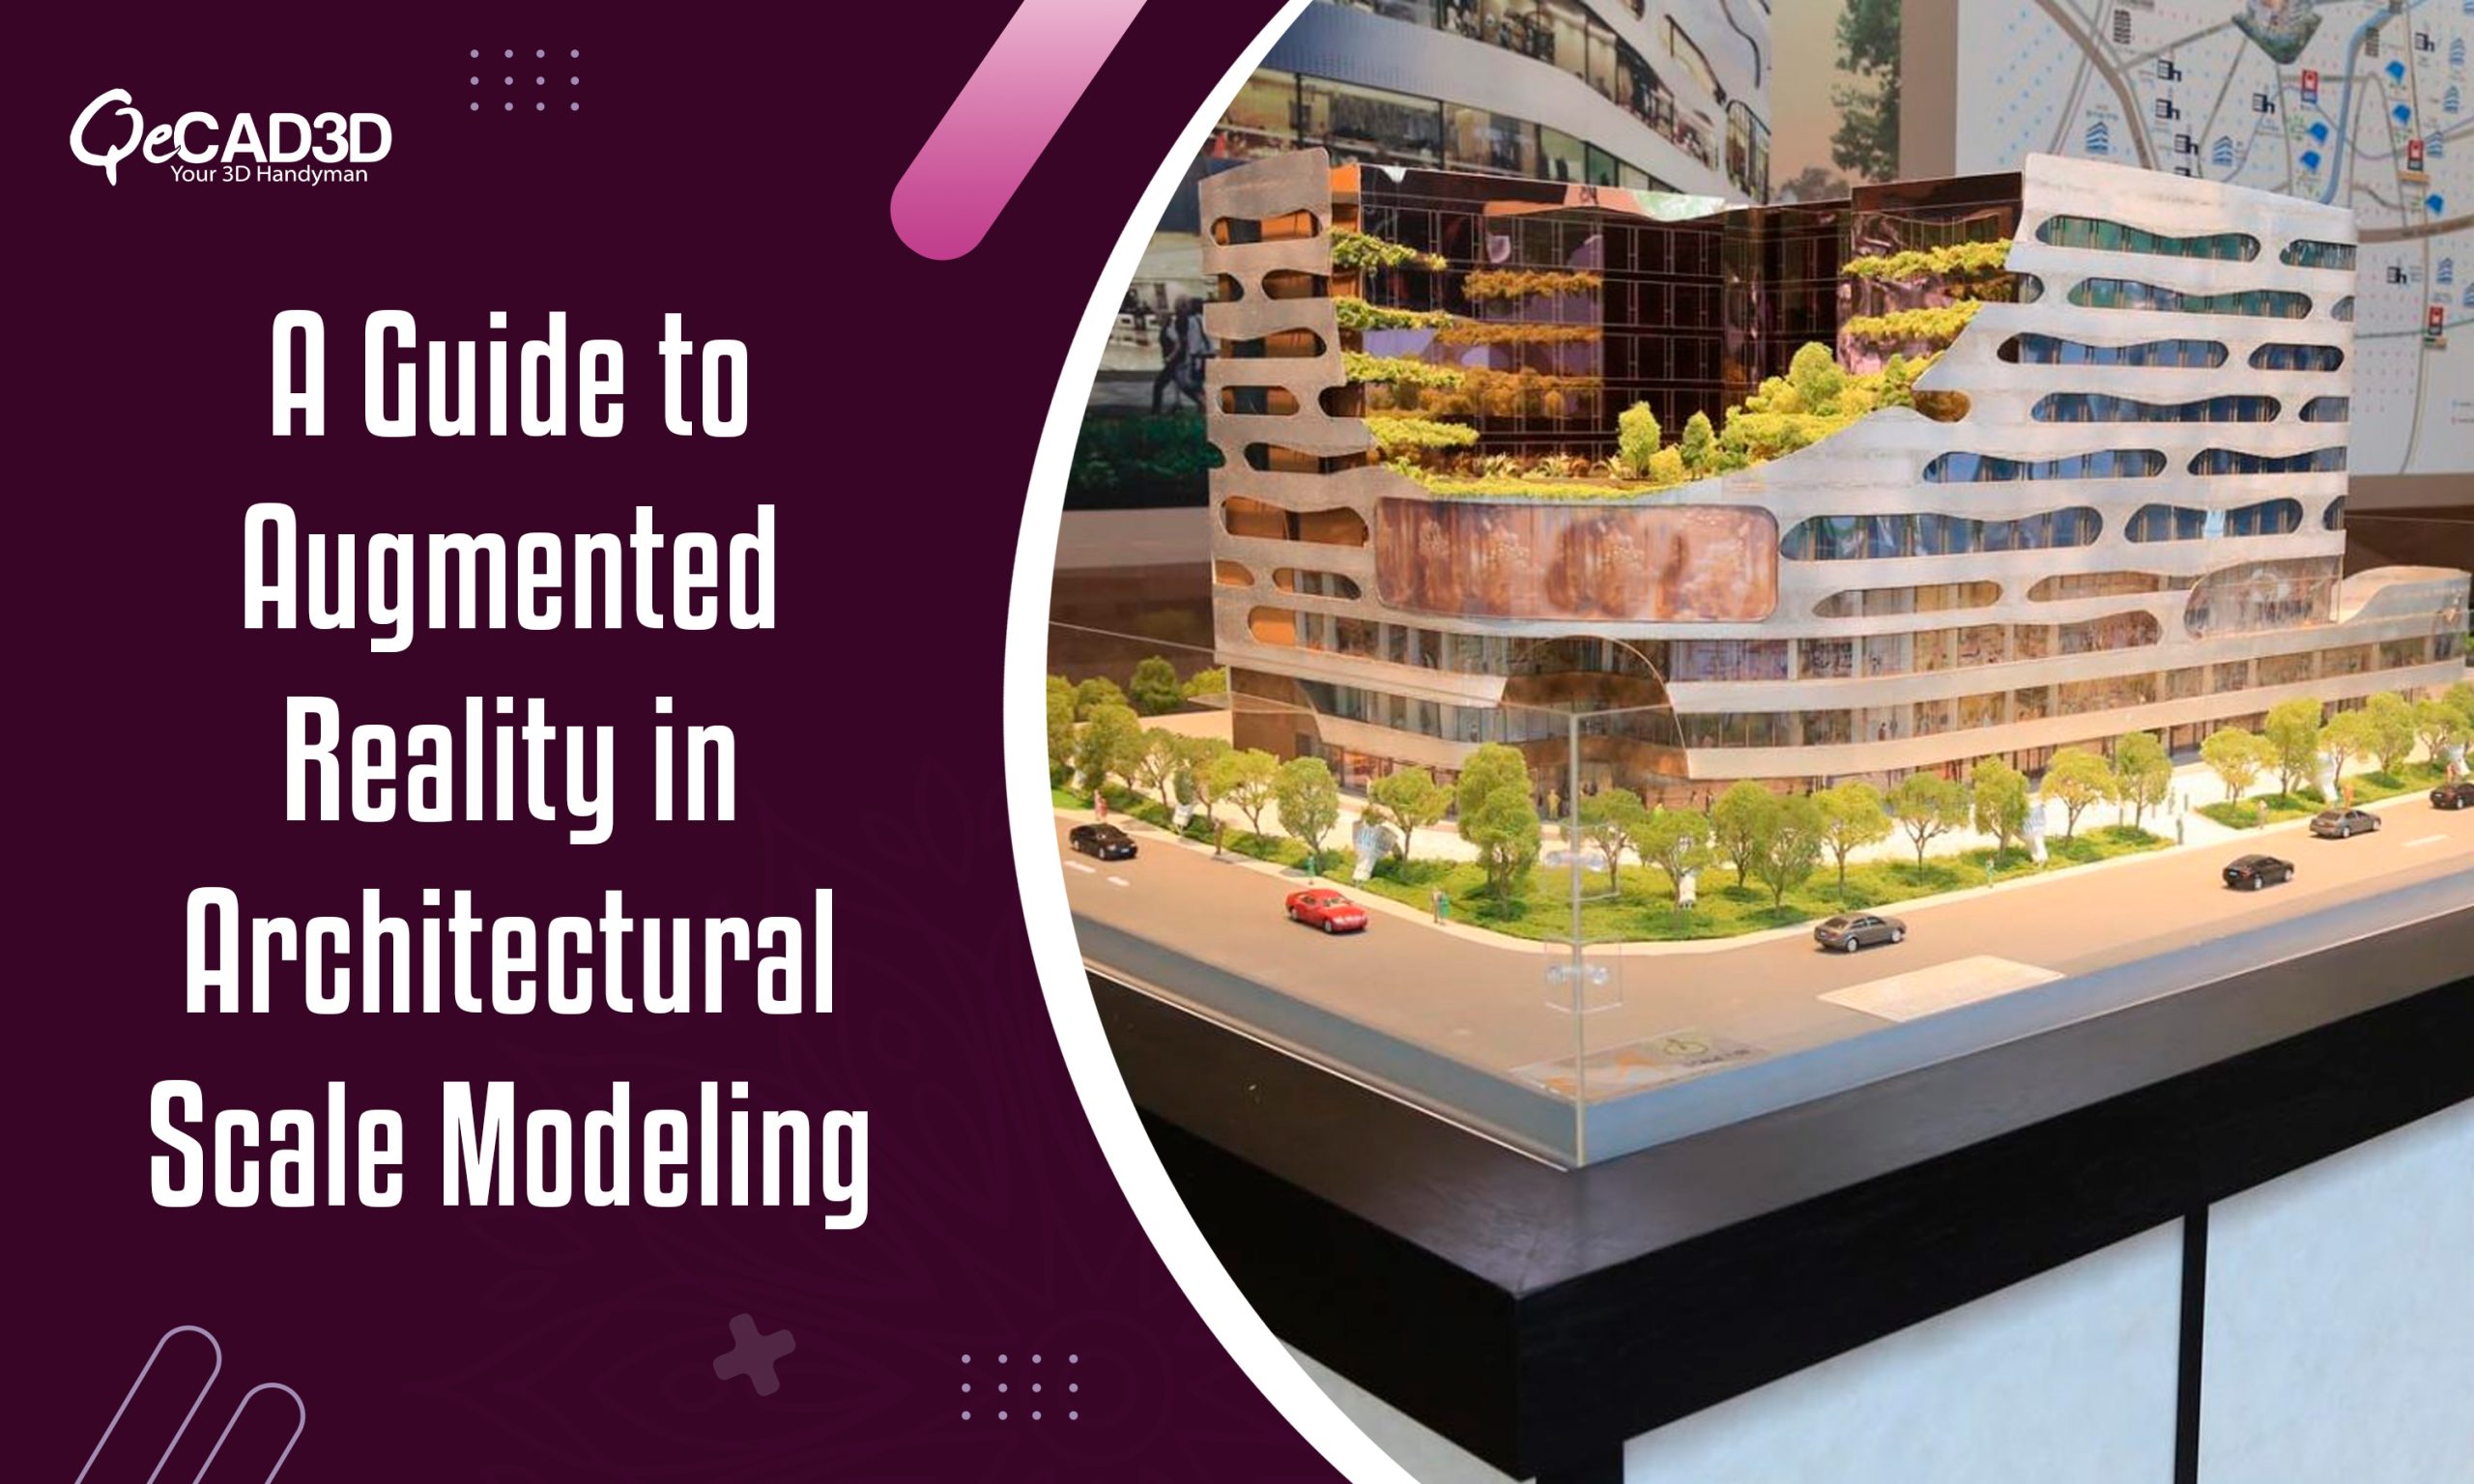 A Guide to Augmented Reality in Architectural Scale Modeling